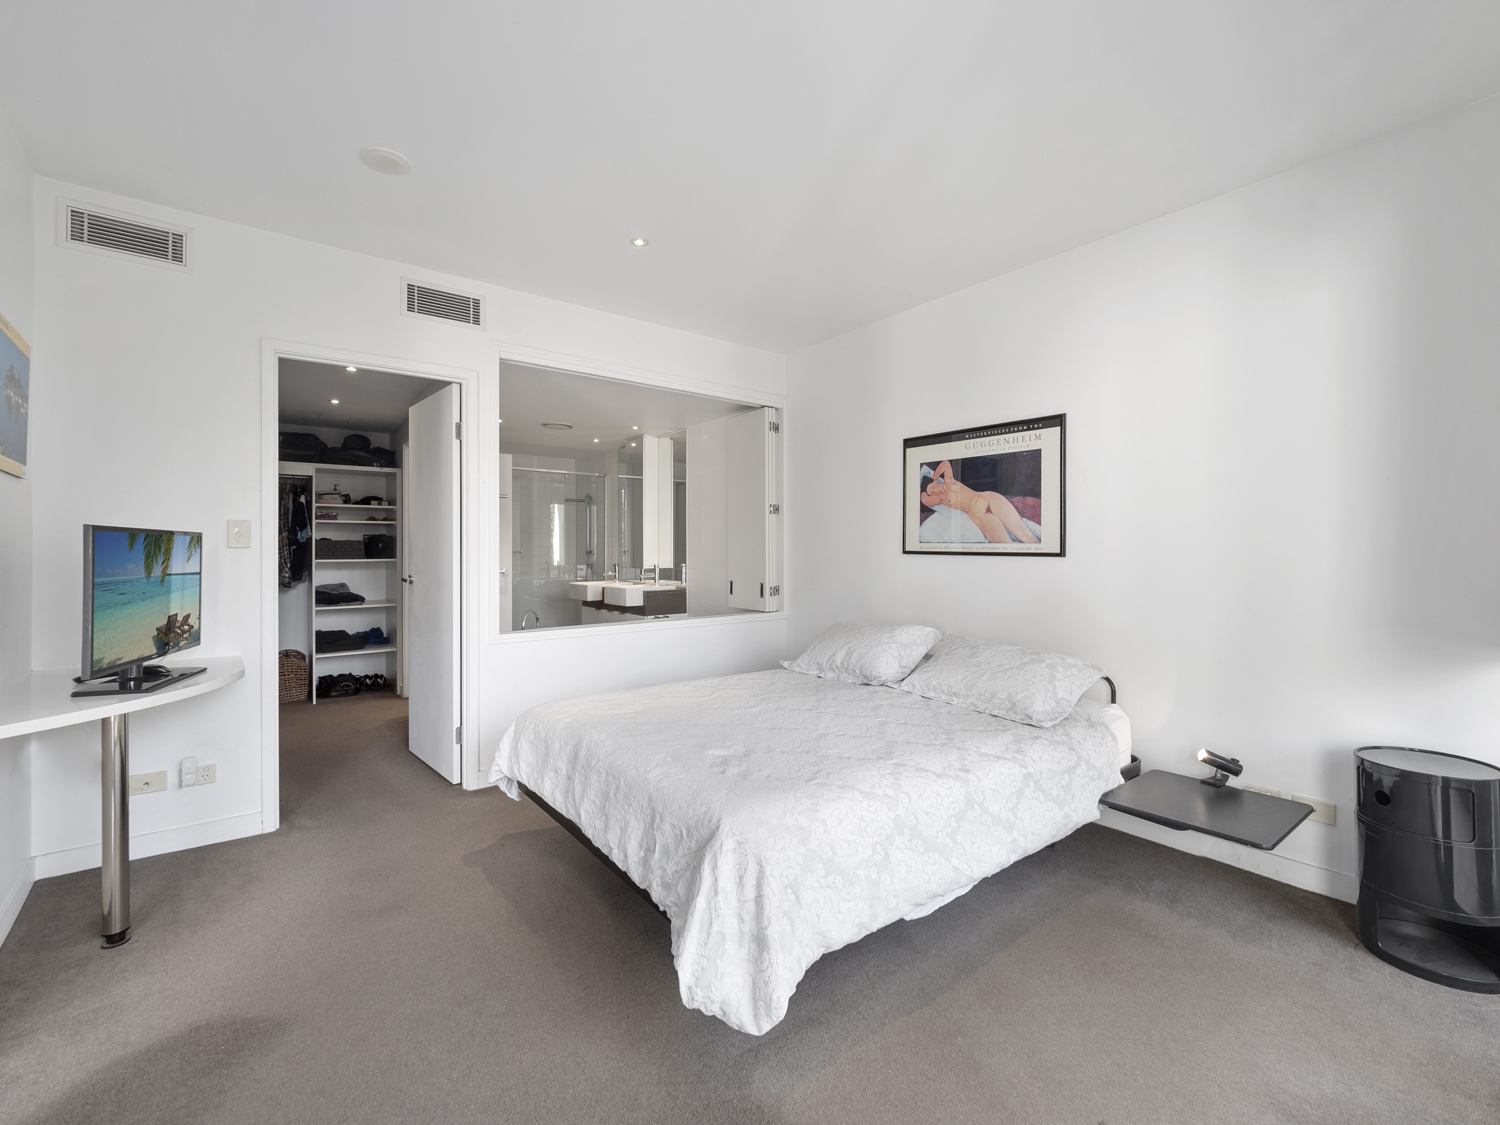 The master bedroom - Photographing an apartment for sale at Pidgeon Close West End